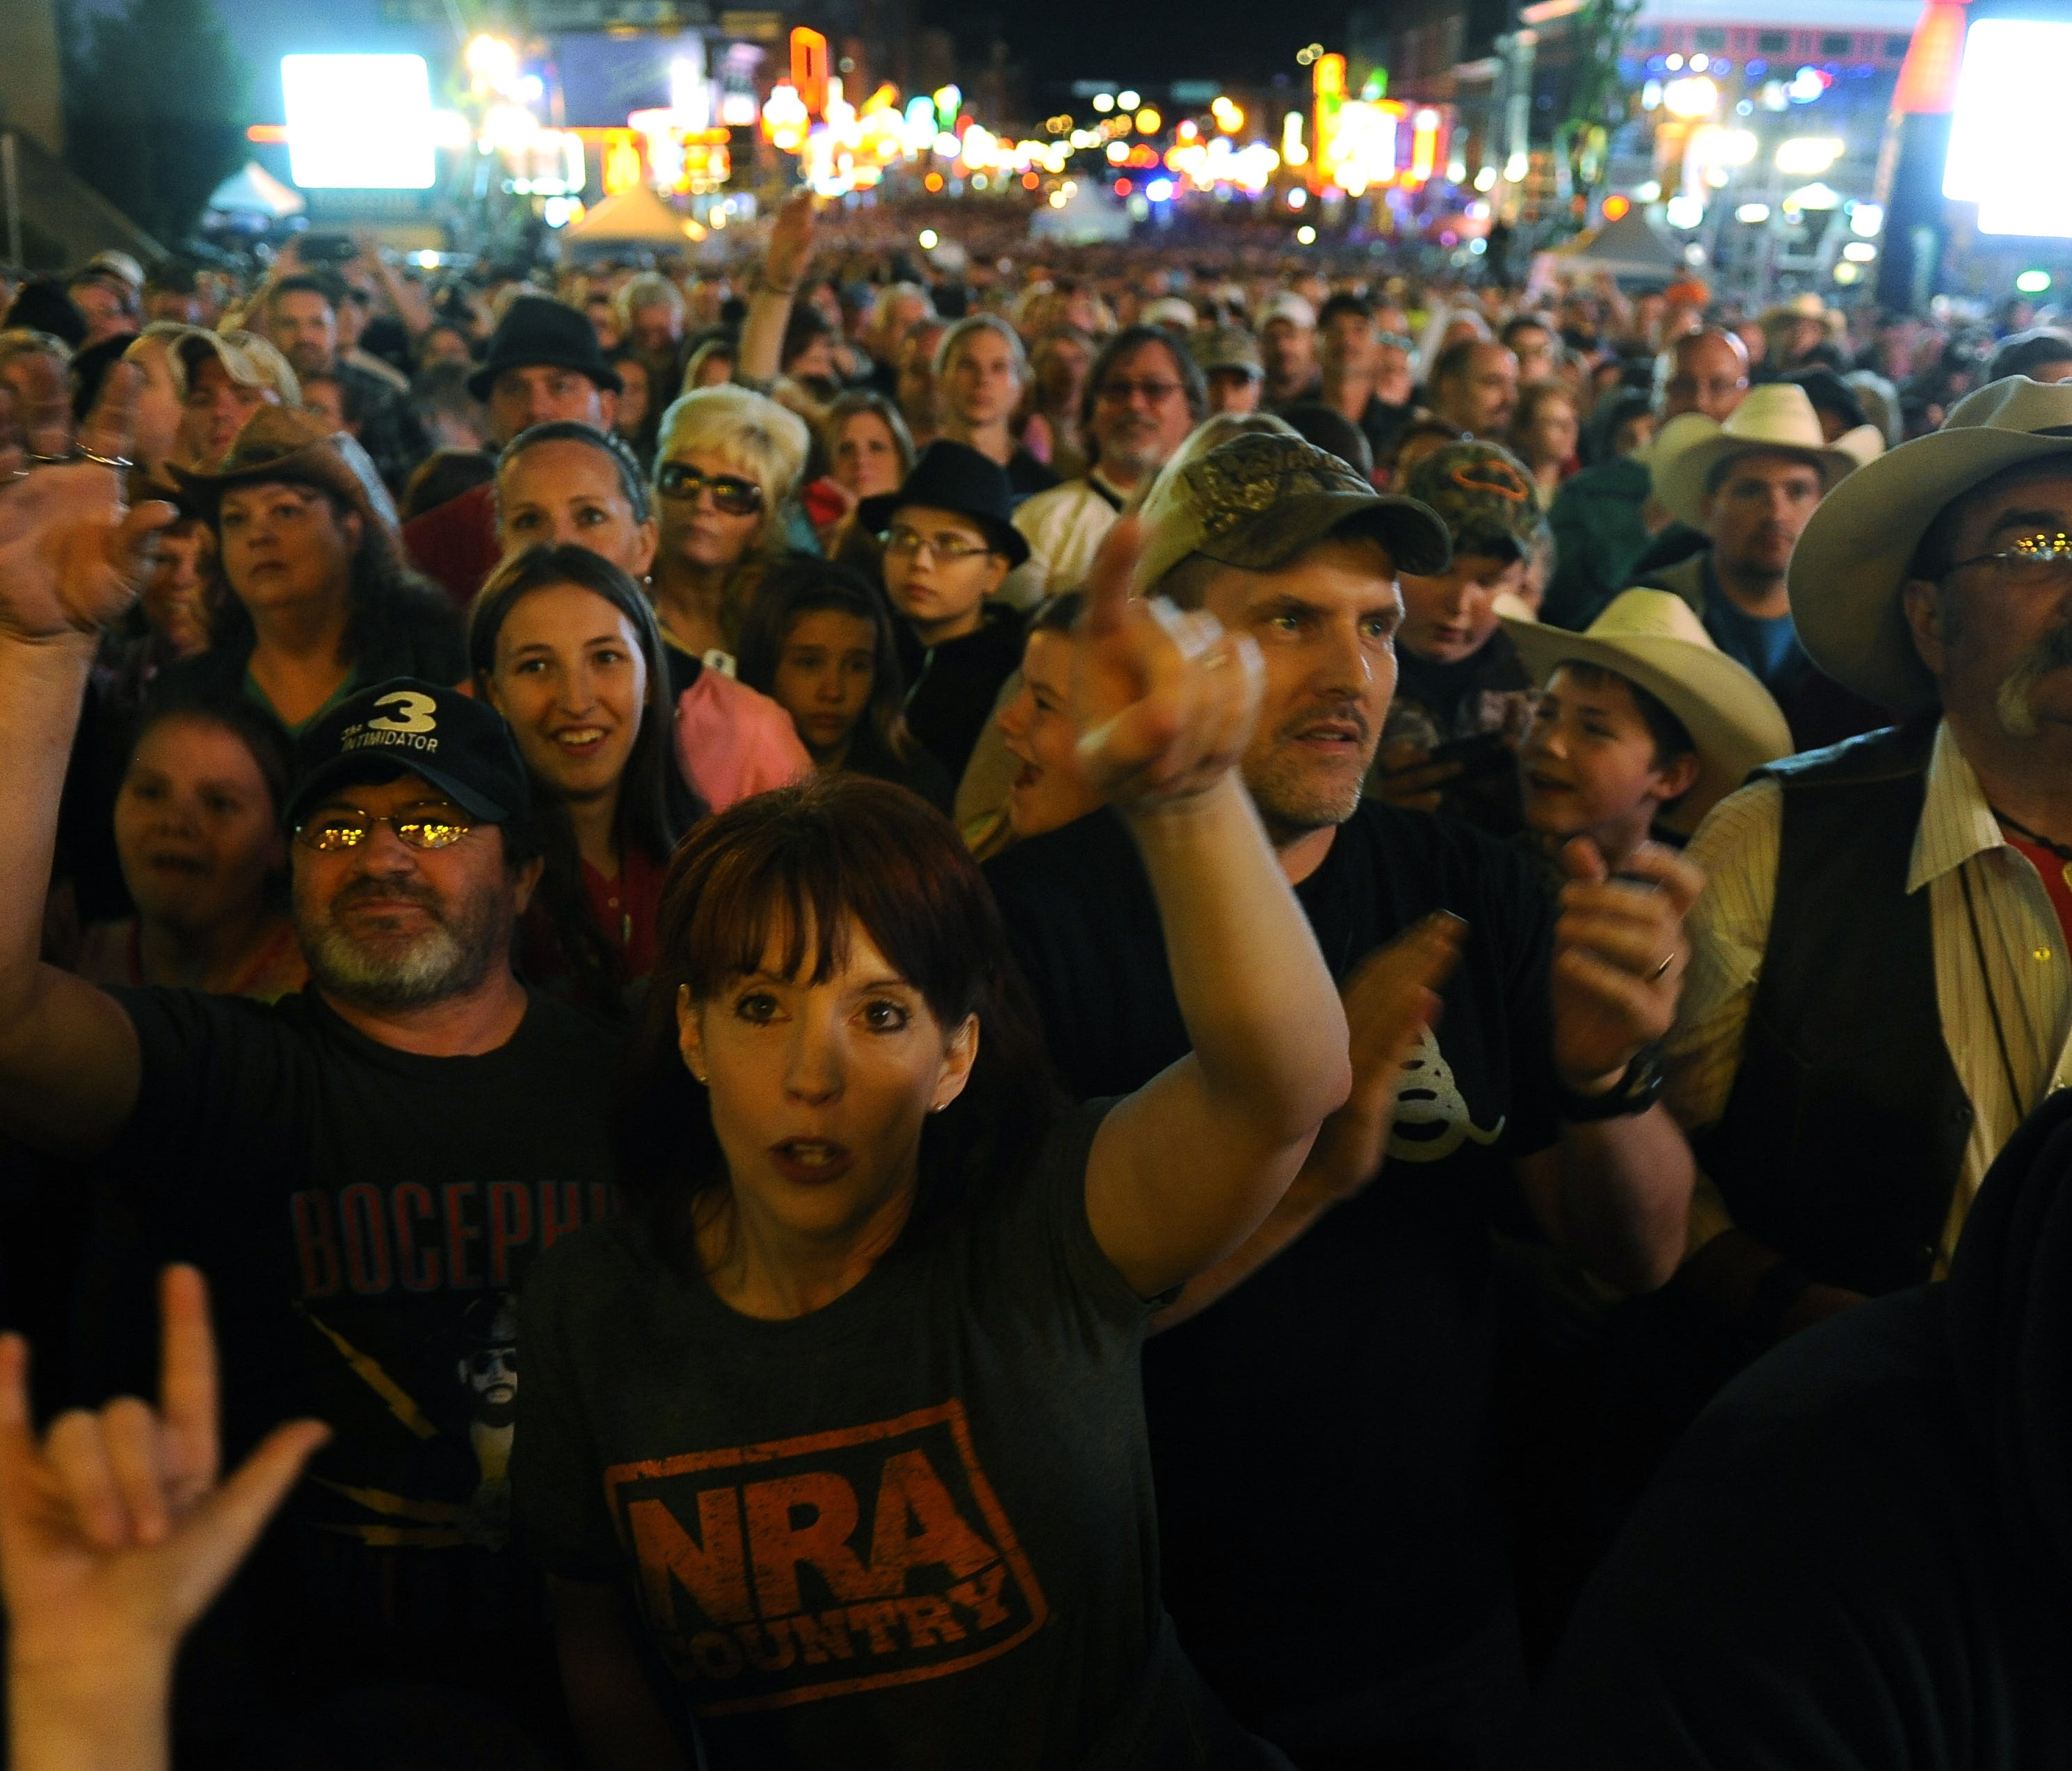 Fans watch Colt Ford's performance at the NRA Country Jam on April 10, 2015, in Nashville, Tenn.